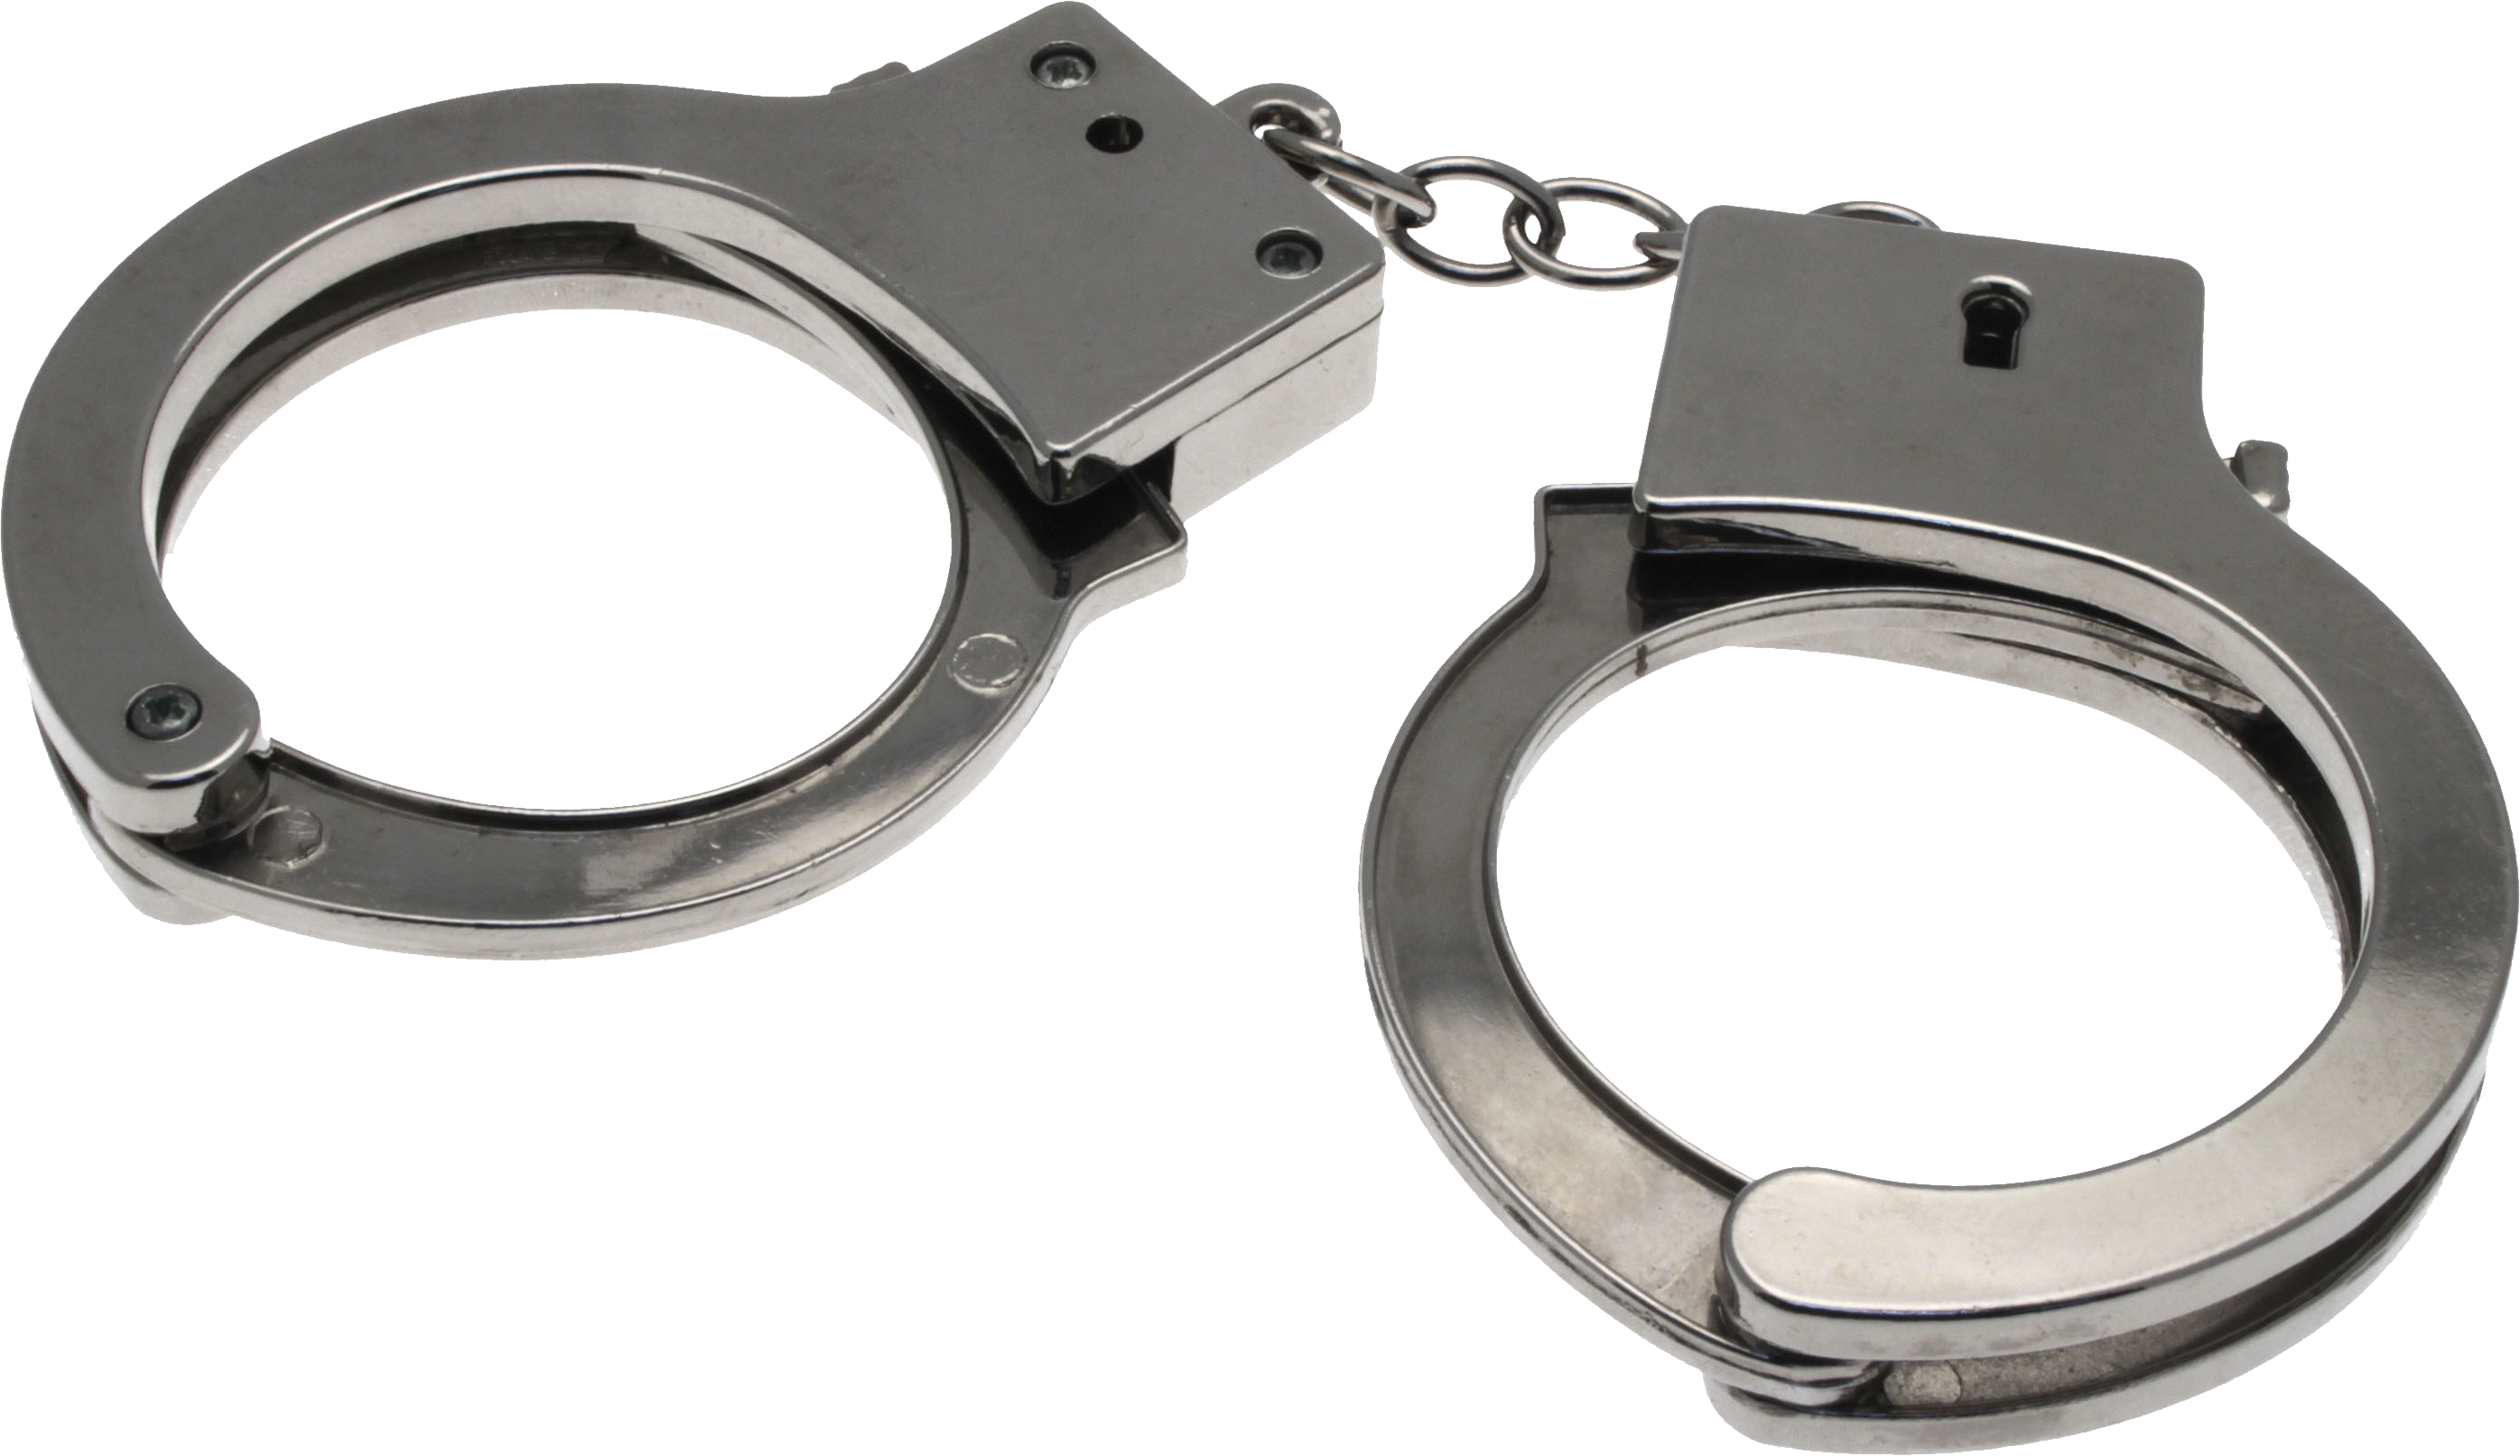 handcuffs png images download crazypngm crazy png images download #29533